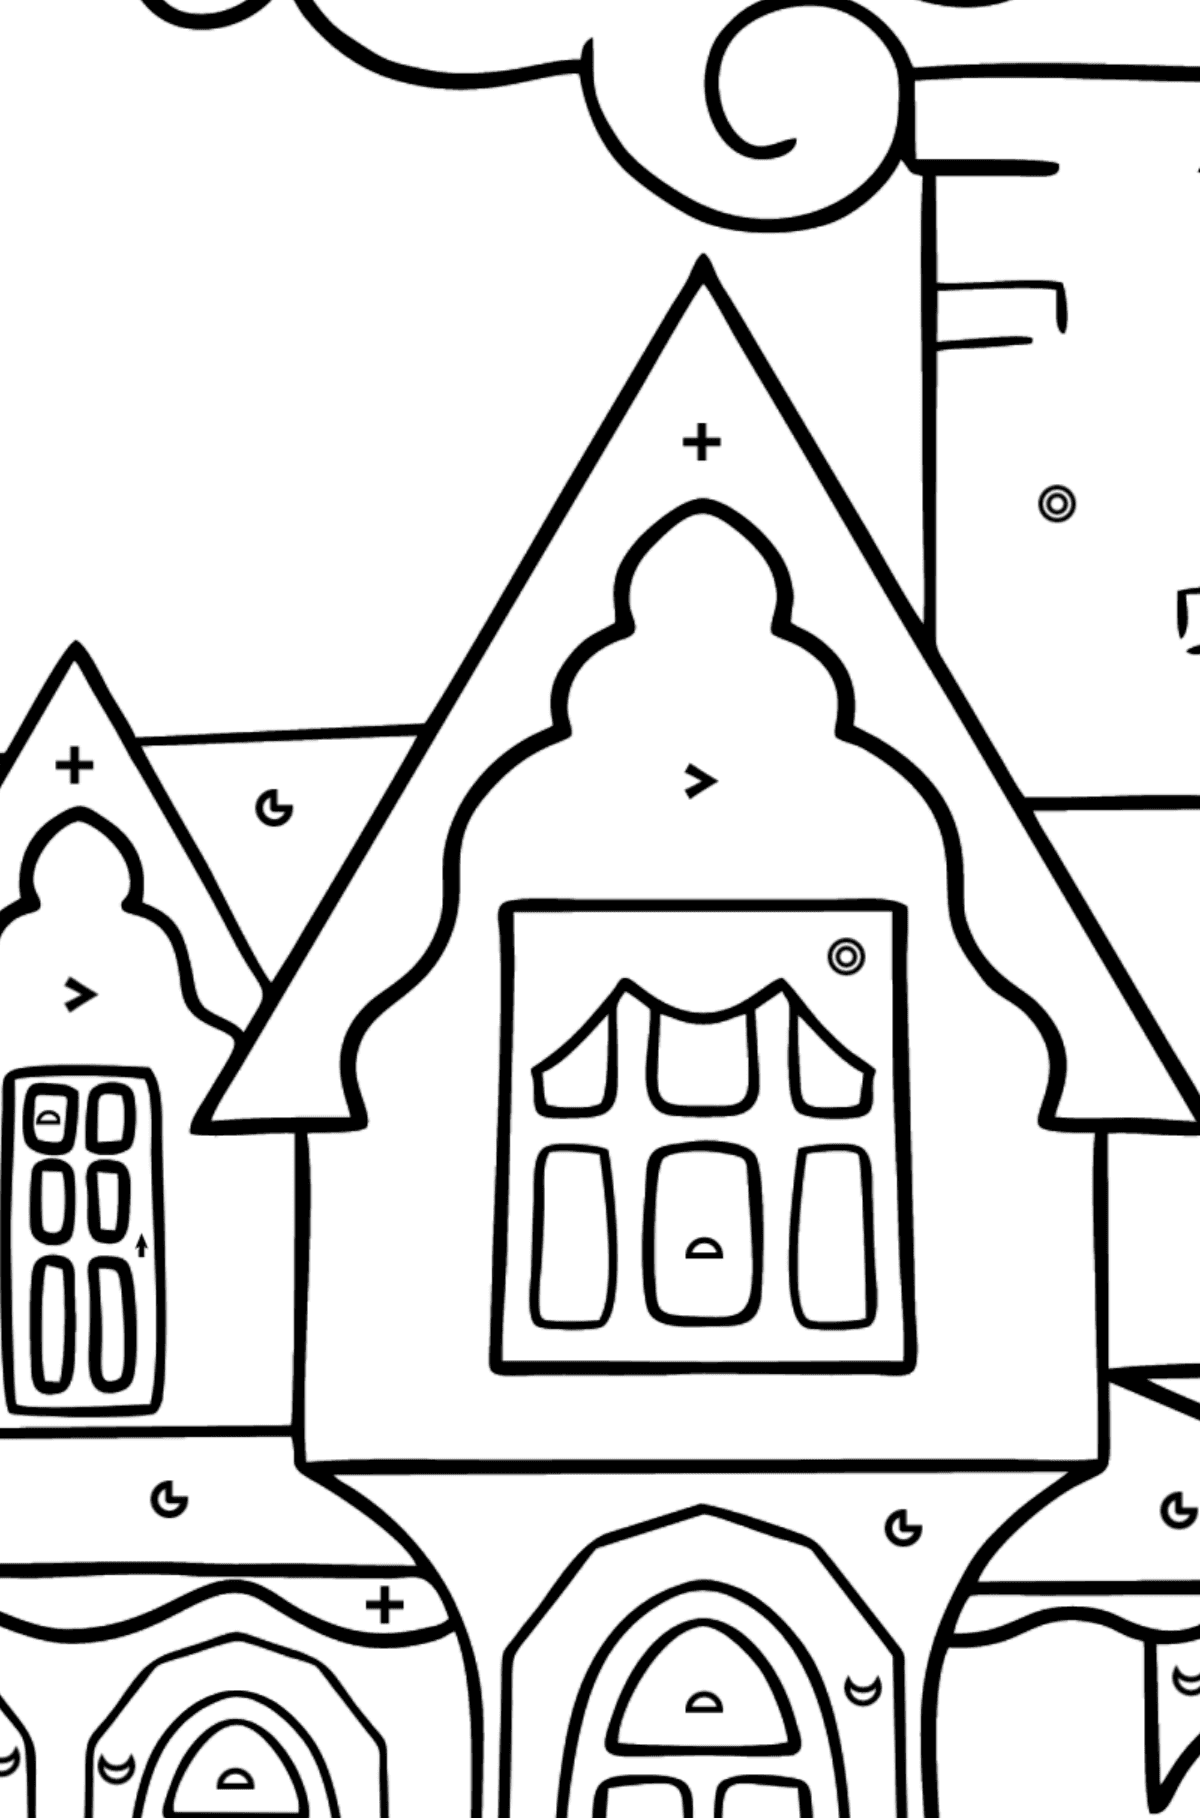 Coloring Page - A Miraculous House - Coloring by Symbols and Geometric Shapes for Kids